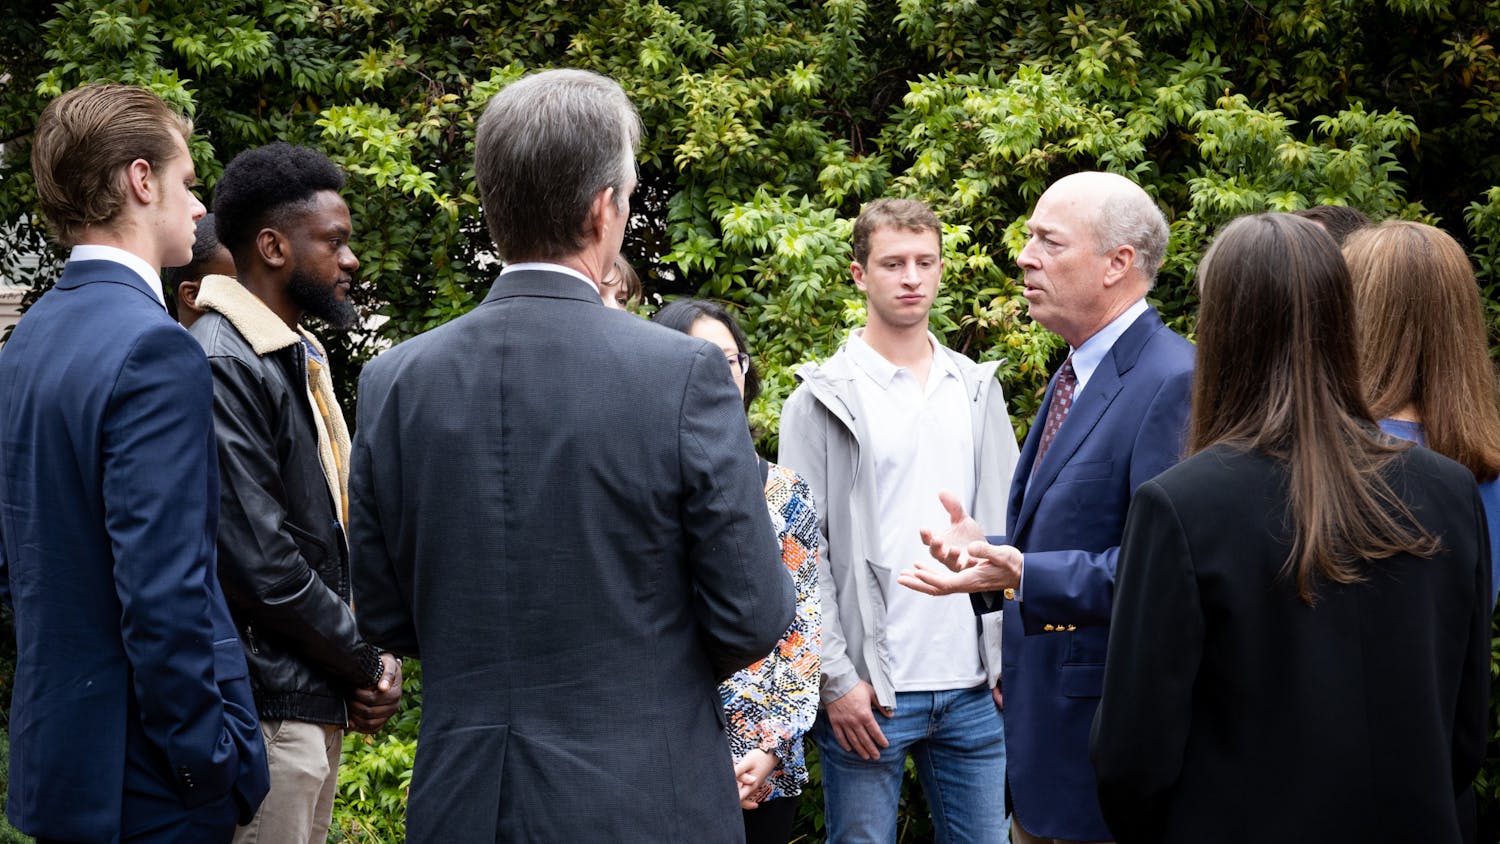 Cary McNair, the CEO of McNair Interests, a private investment and management company headquartered in Houston, Texas, talks success with USC student entrepreneurs on the Horseshoe on Oct. 12, 2022.&nbsp;